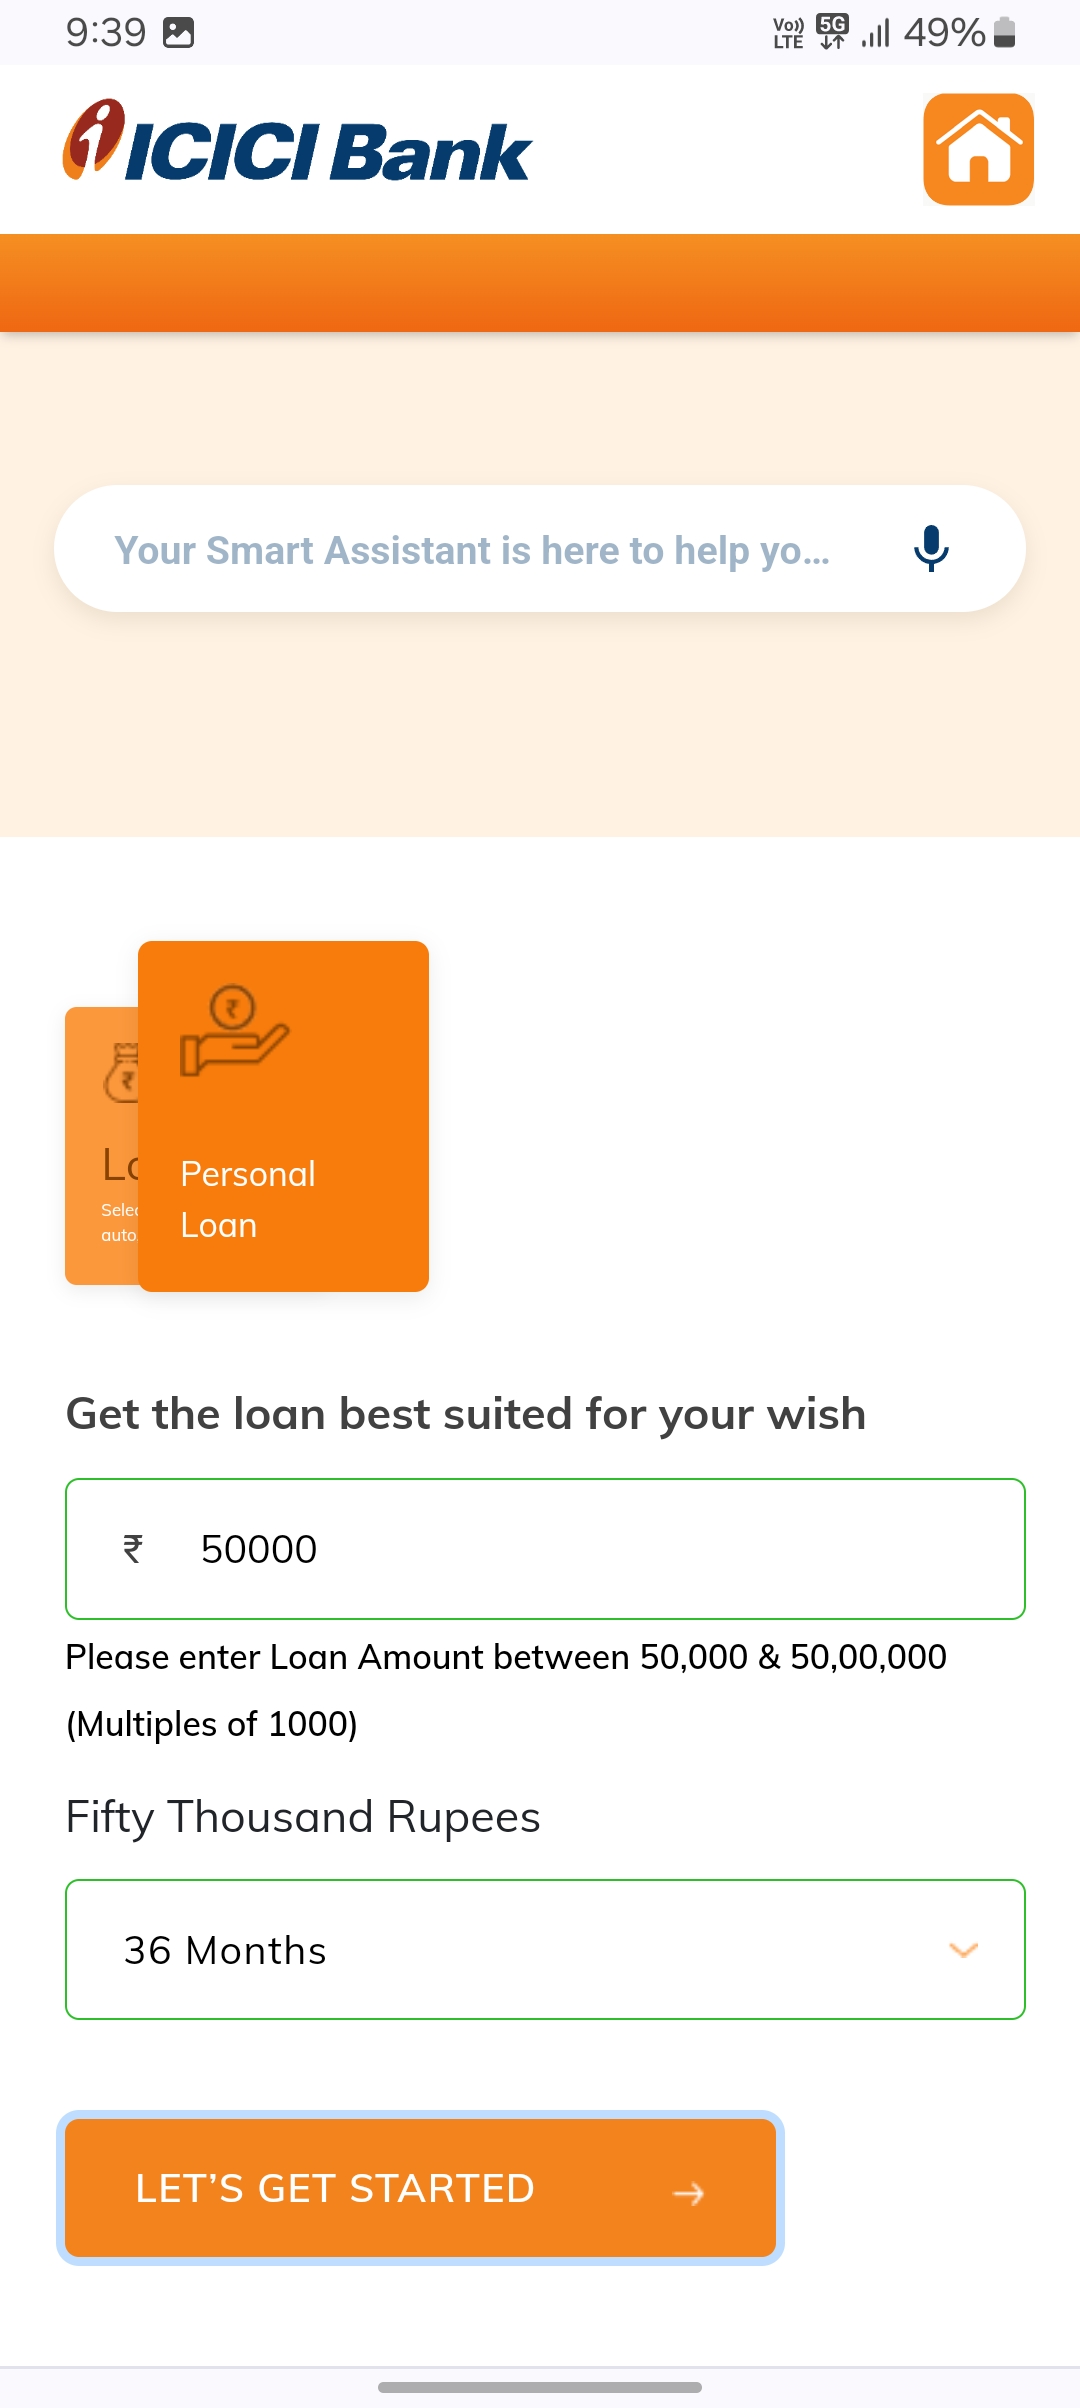 ICICI Bank personal loan apply process step by step